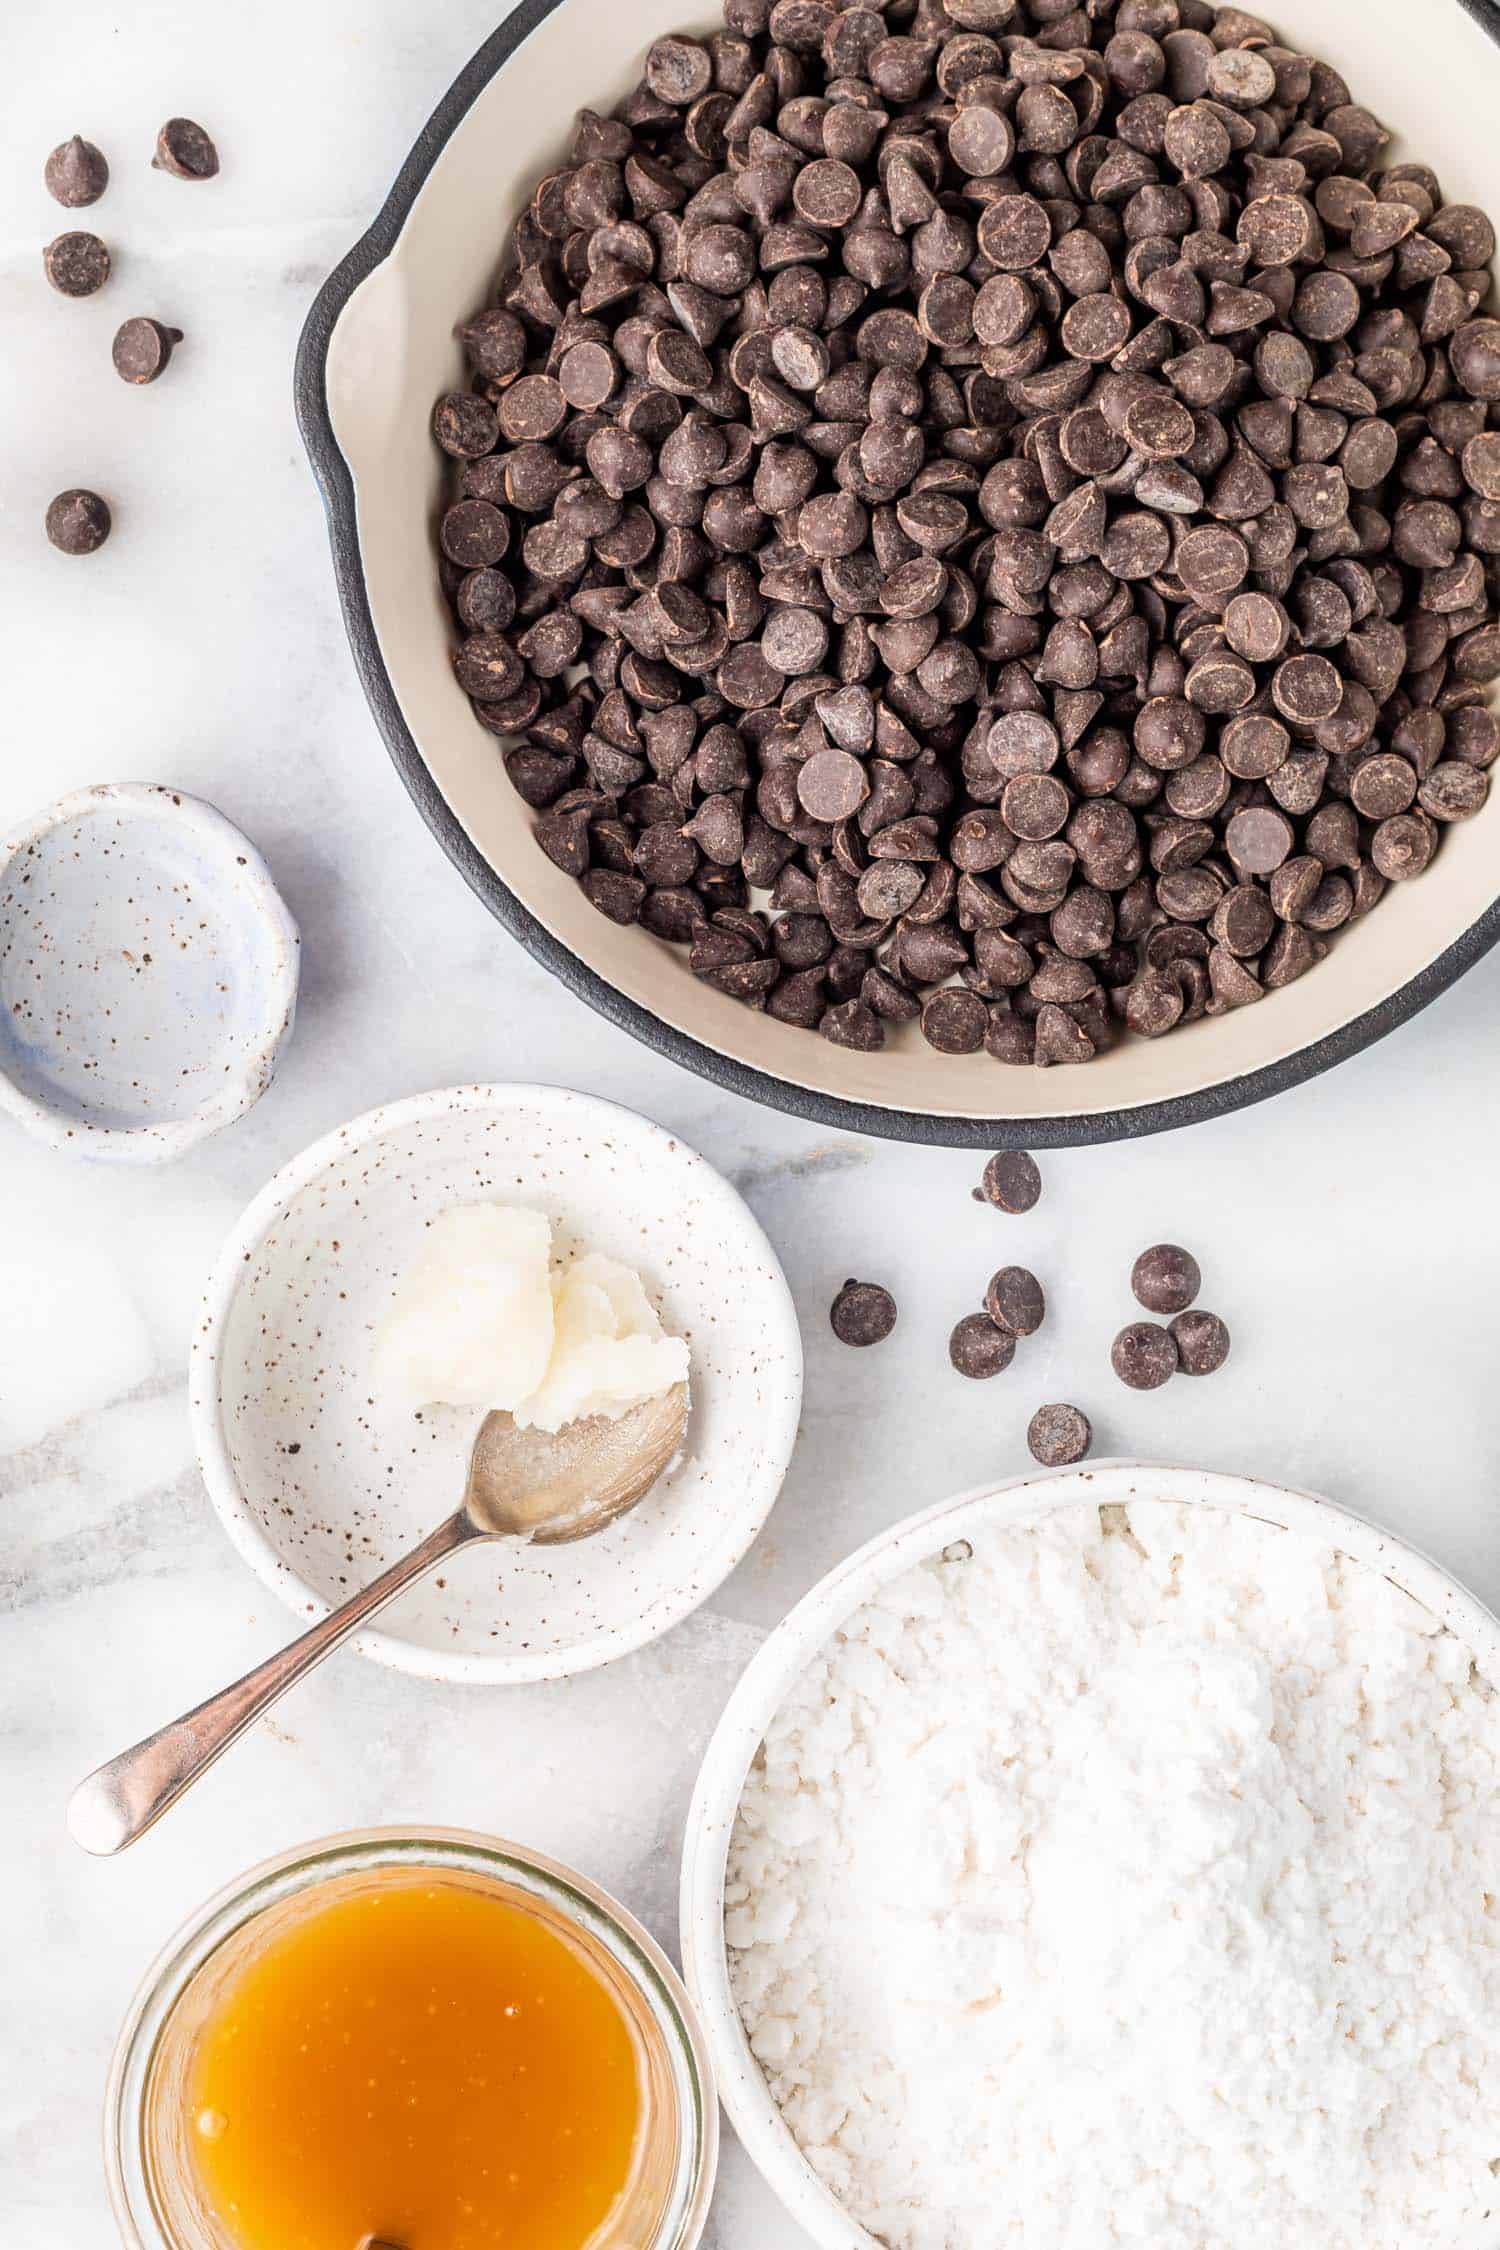 Keto Peppermint Patty ingredients - chocolate chips in a small enameled cast iron skillet, peppermint oil in a small blue bowl, coconut oil in a small white bowl, powdered sugar-free sweetener in a white bowl, and low-carb condensed milk in a jar